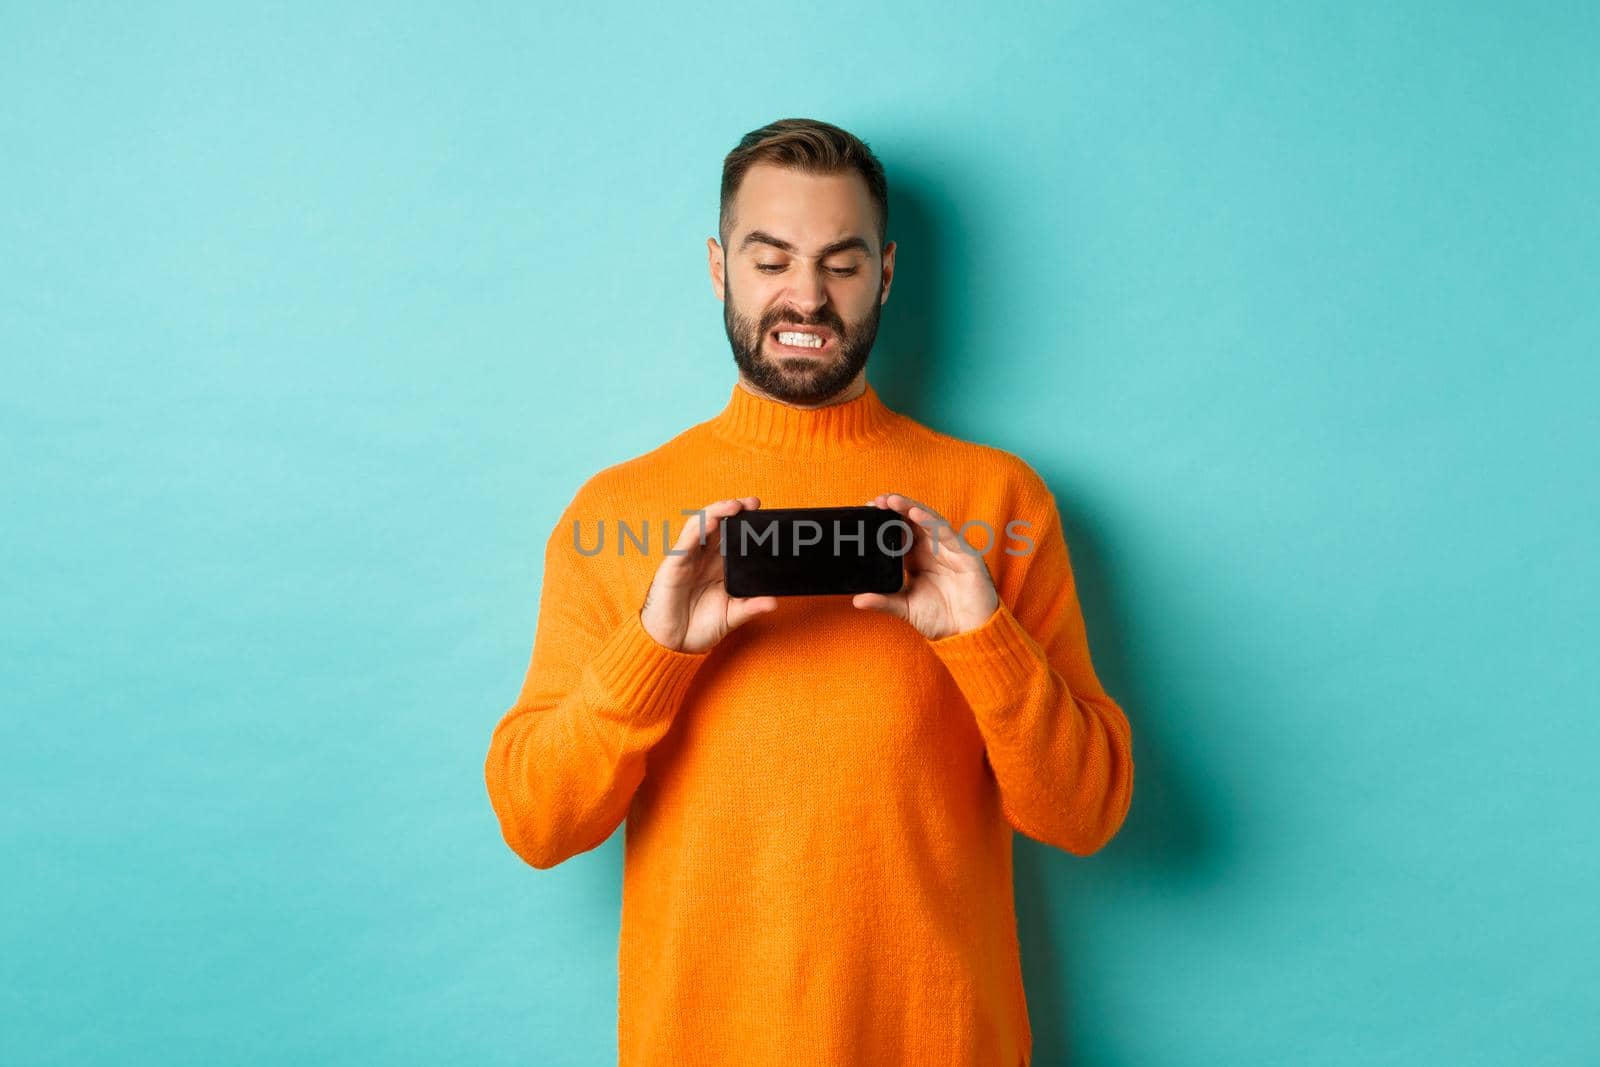 Image of man cringe at something on mobile screen, staring disgusted at display, showing smartphone, standing over light blue background.